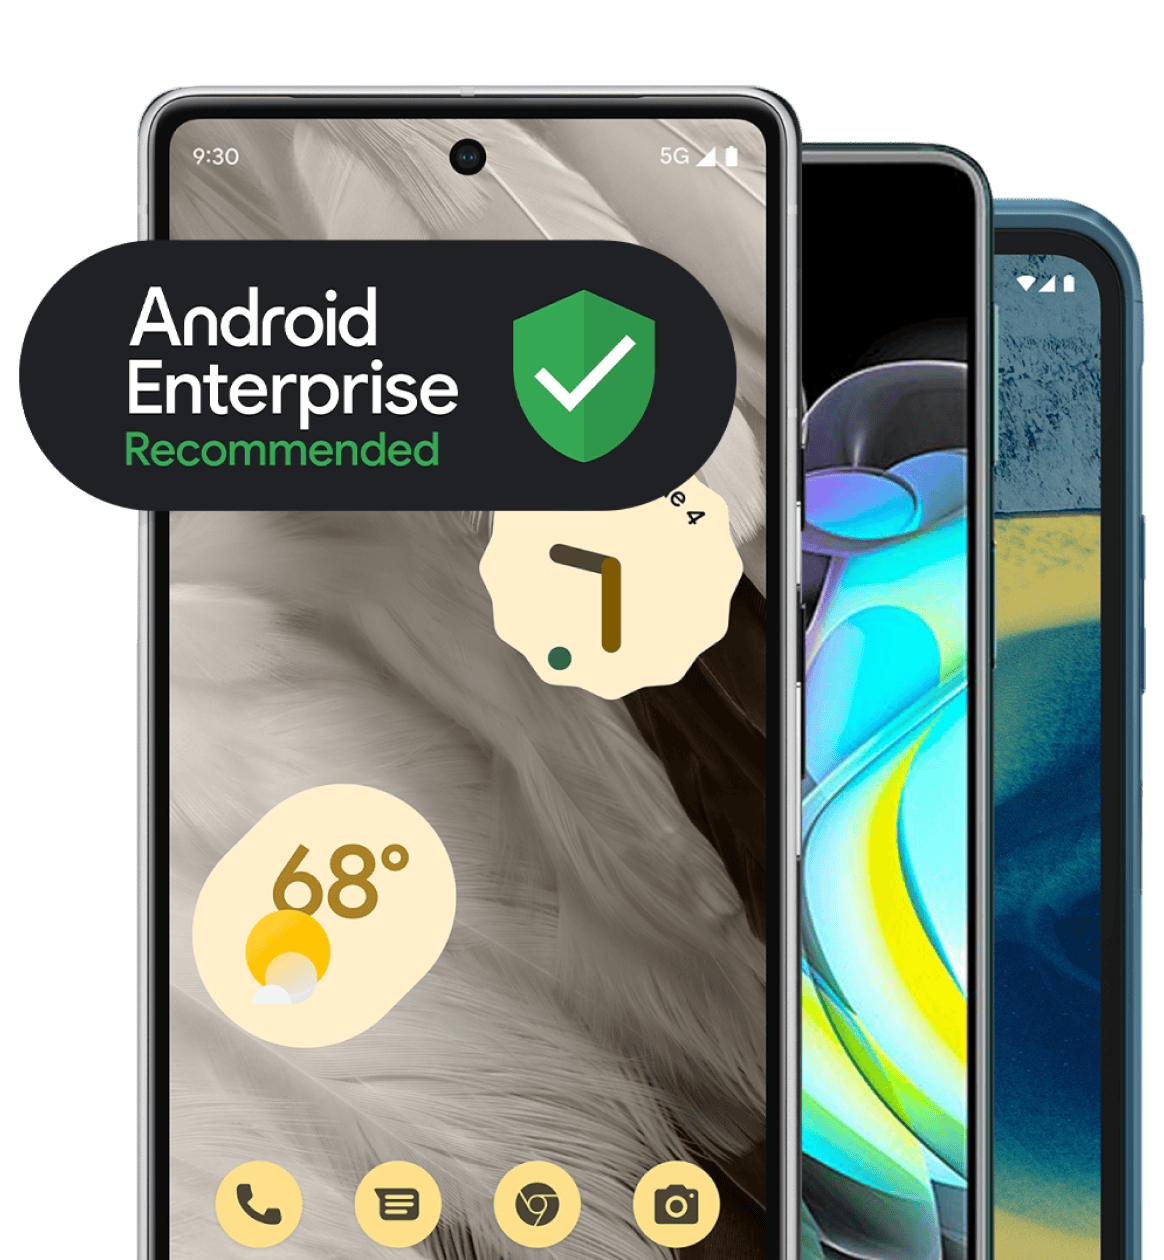 Android Enterprise Recommended Devices and Services